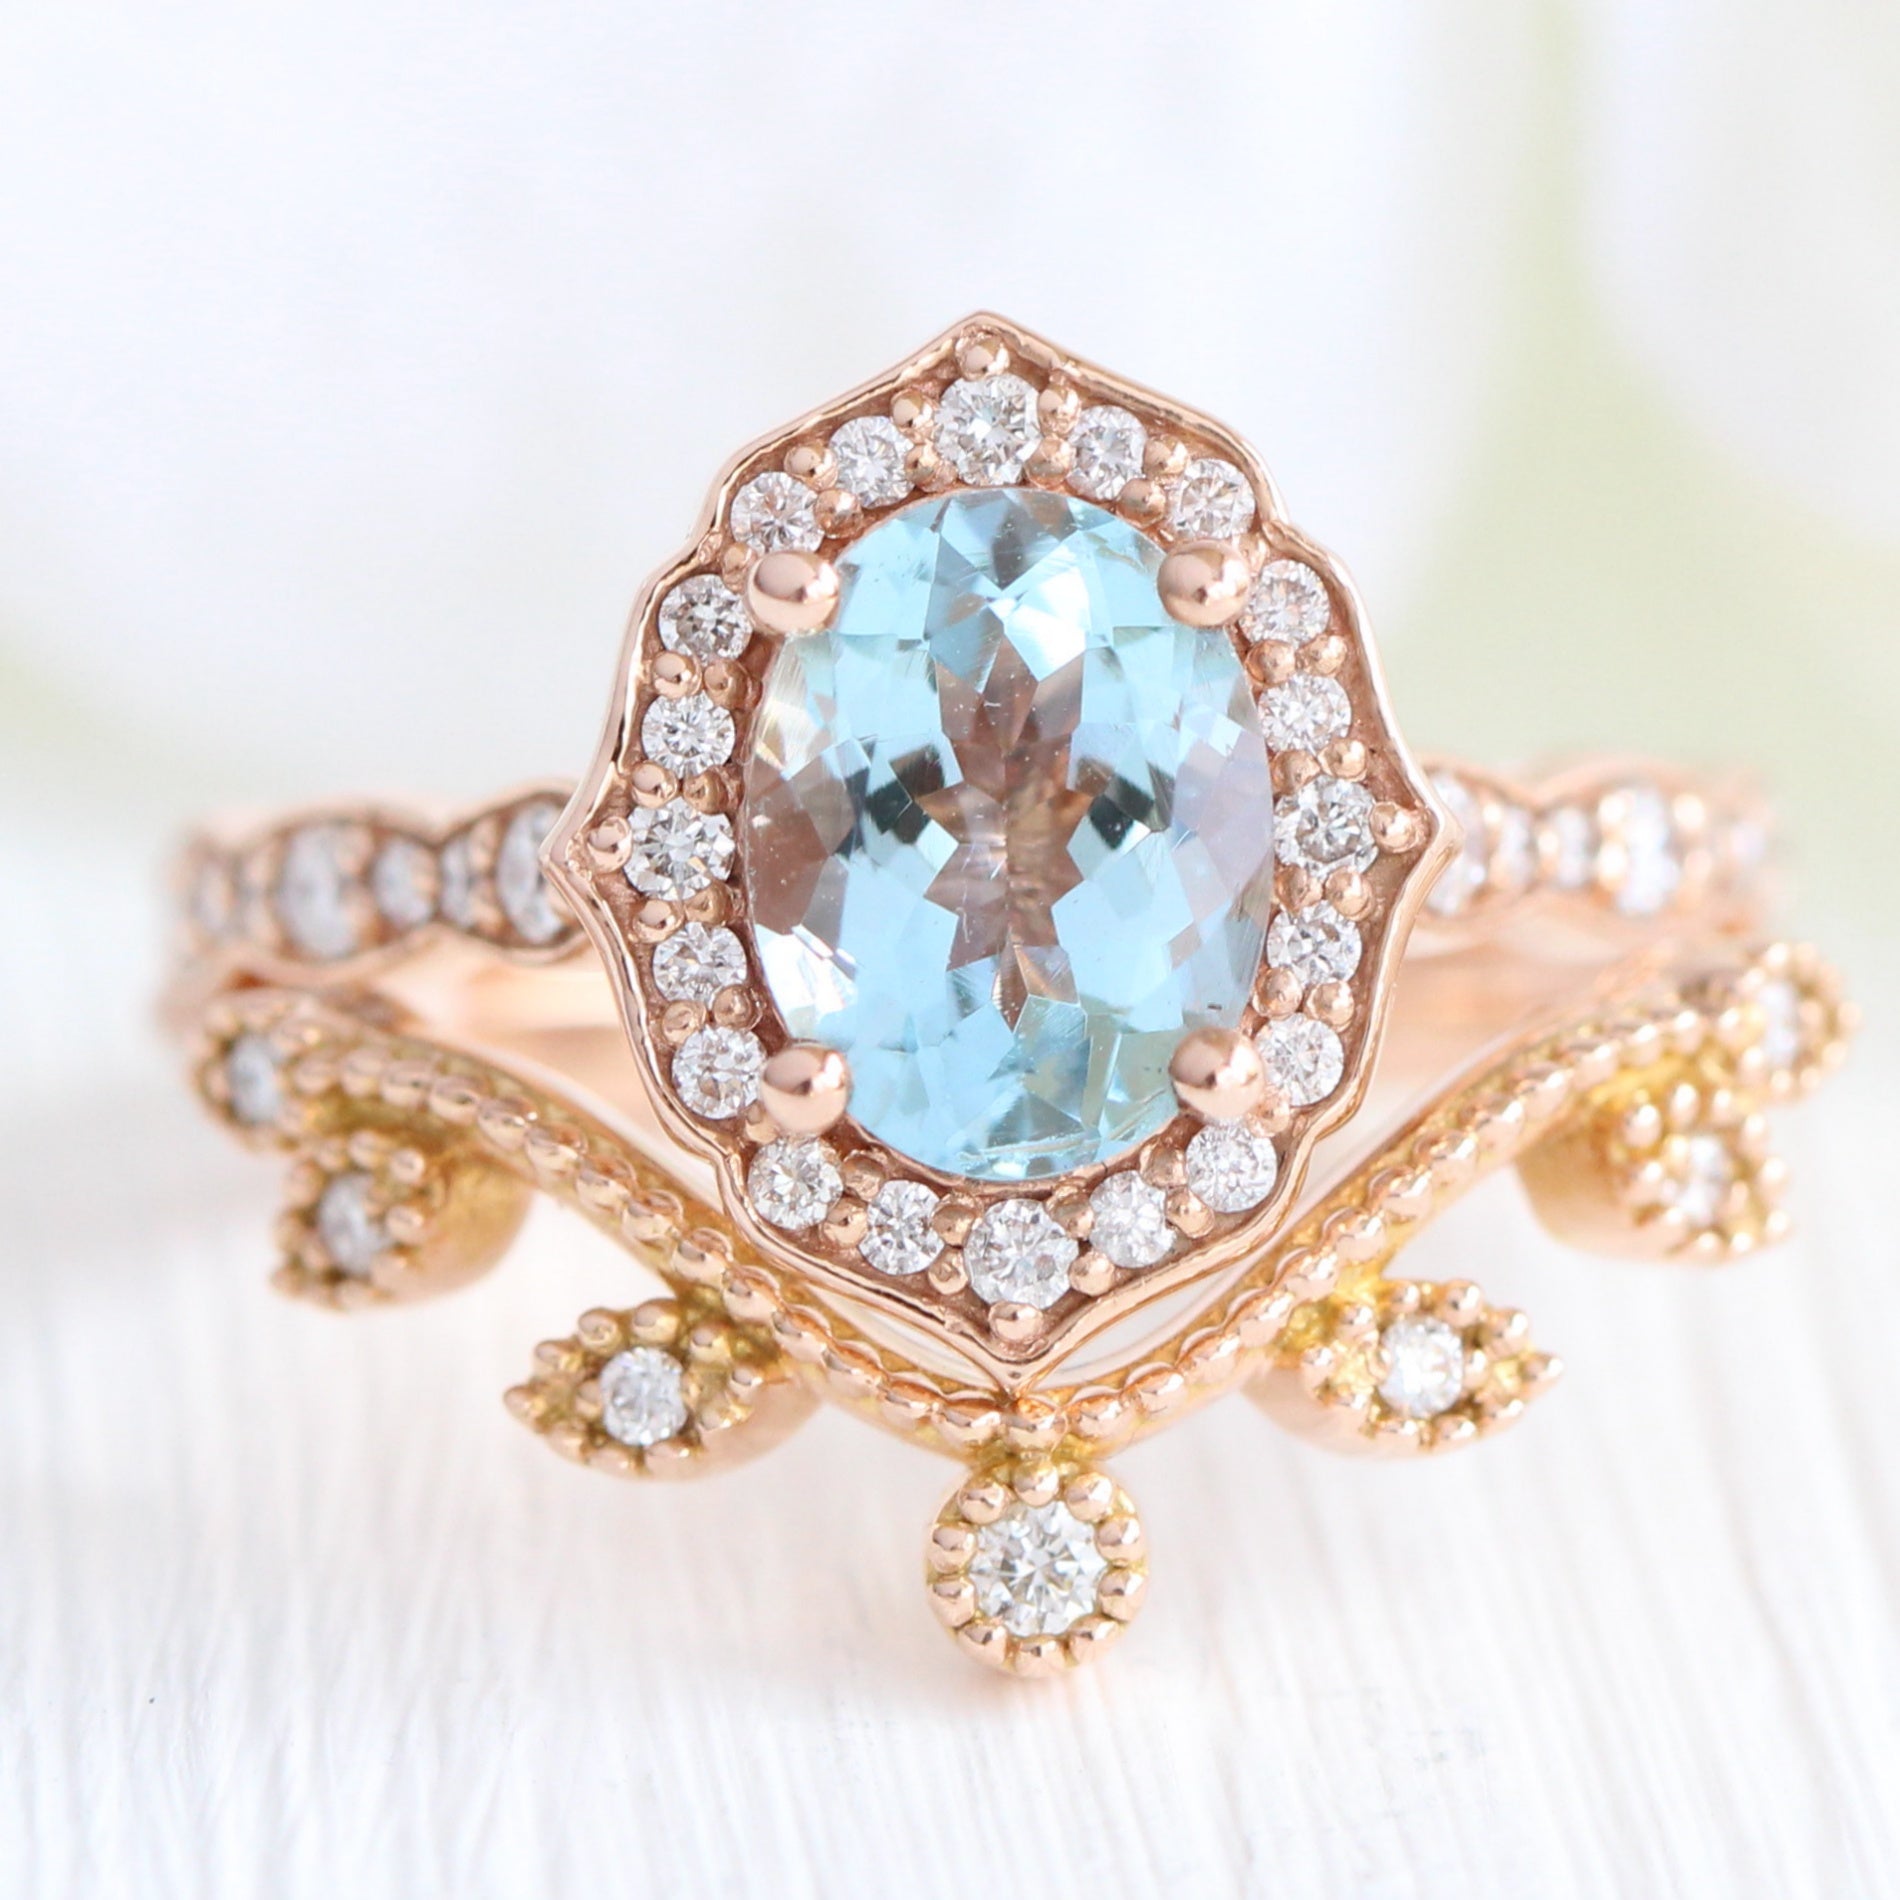 Oval Aquamarine Diamond Ring in Vintage Floral Scalloped Band